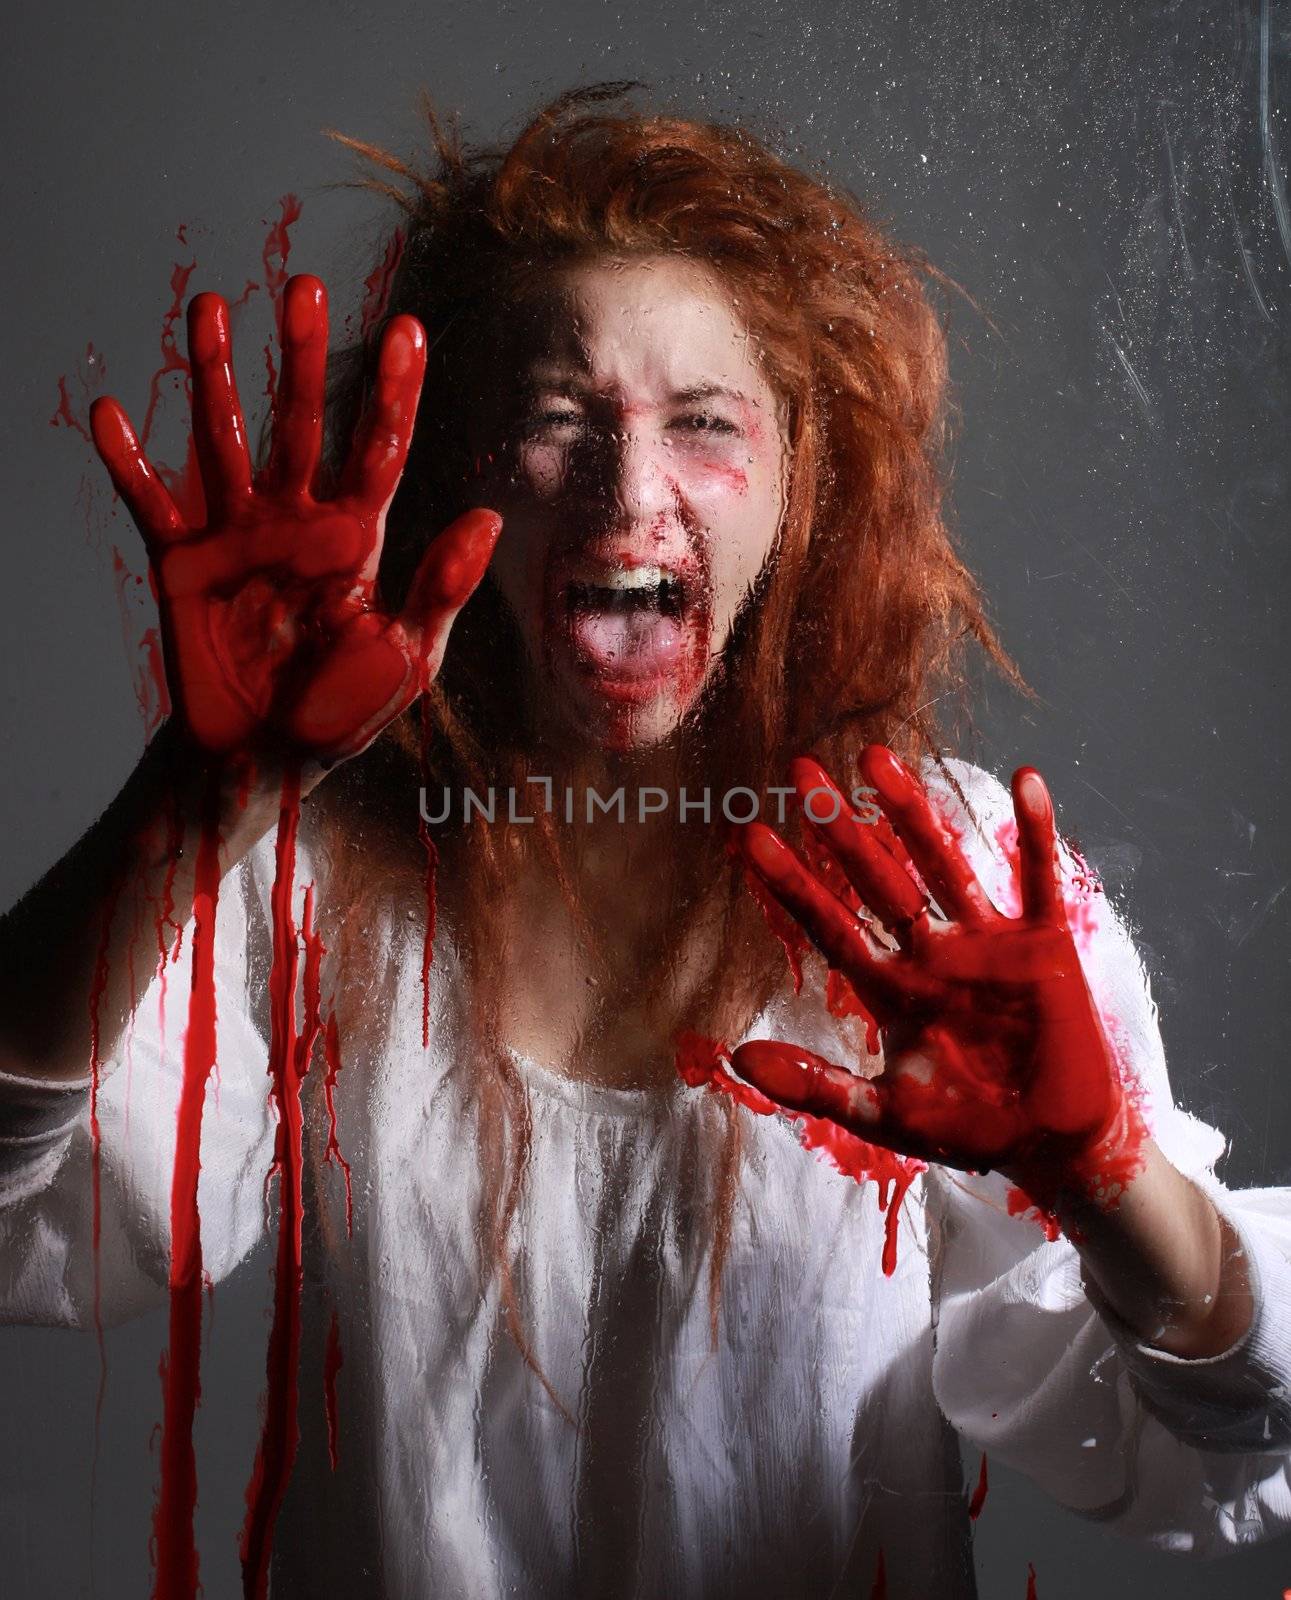 Horror Themed Image With Bleeding Freightened Woman by tobkatrina